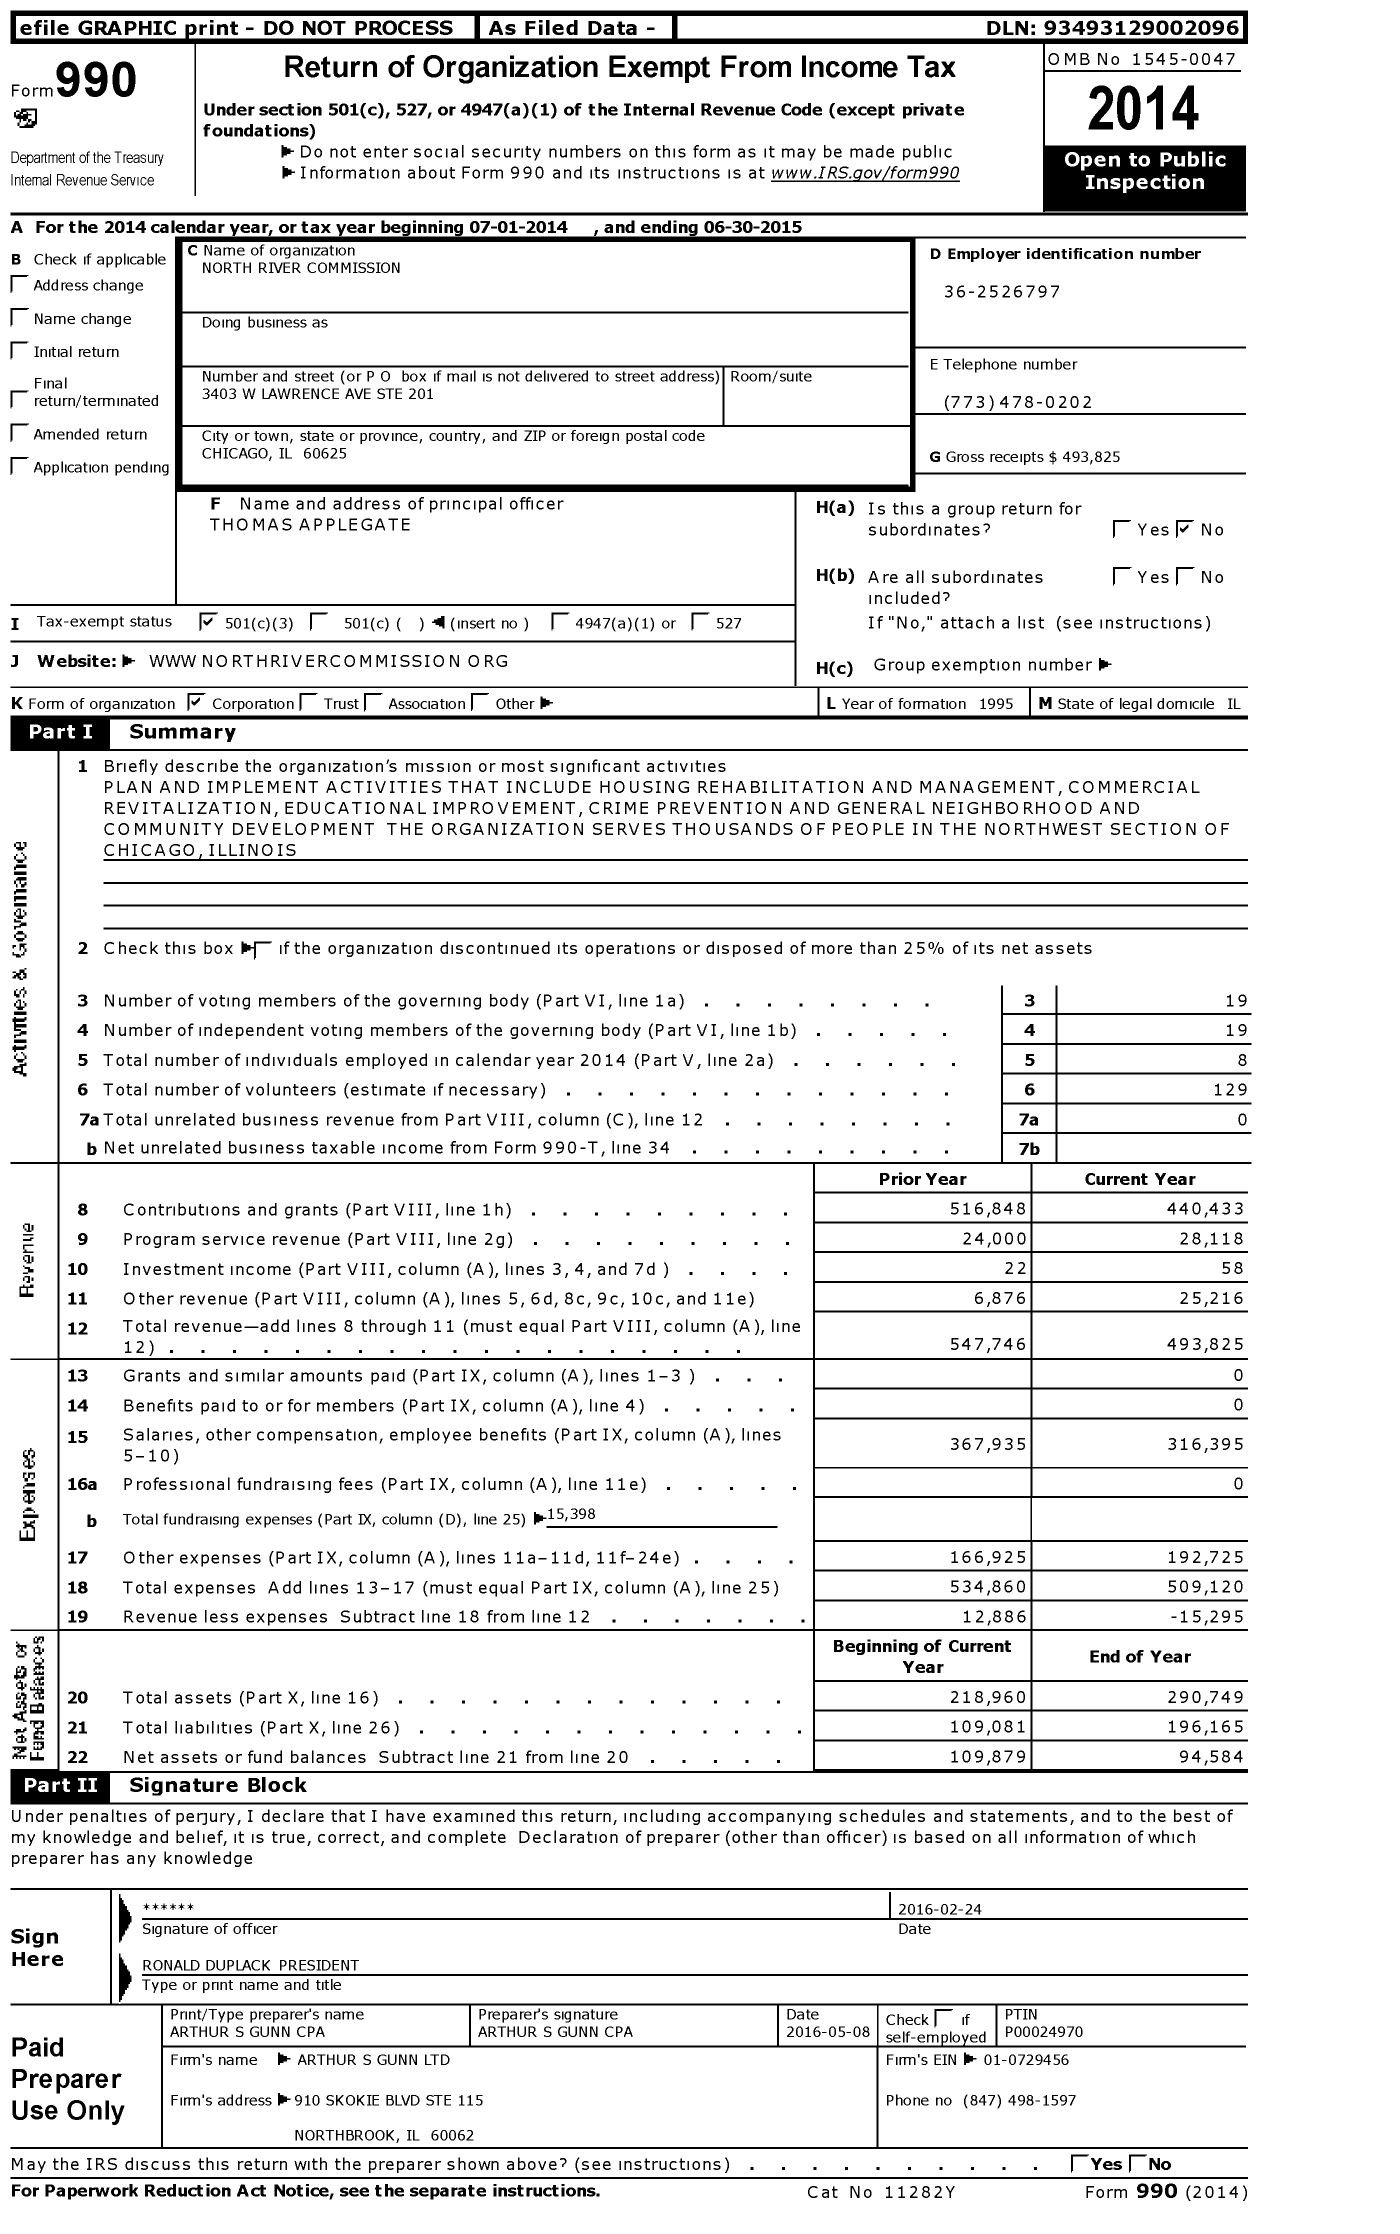 Image of first page of 2014 Form 990 for North River Commission